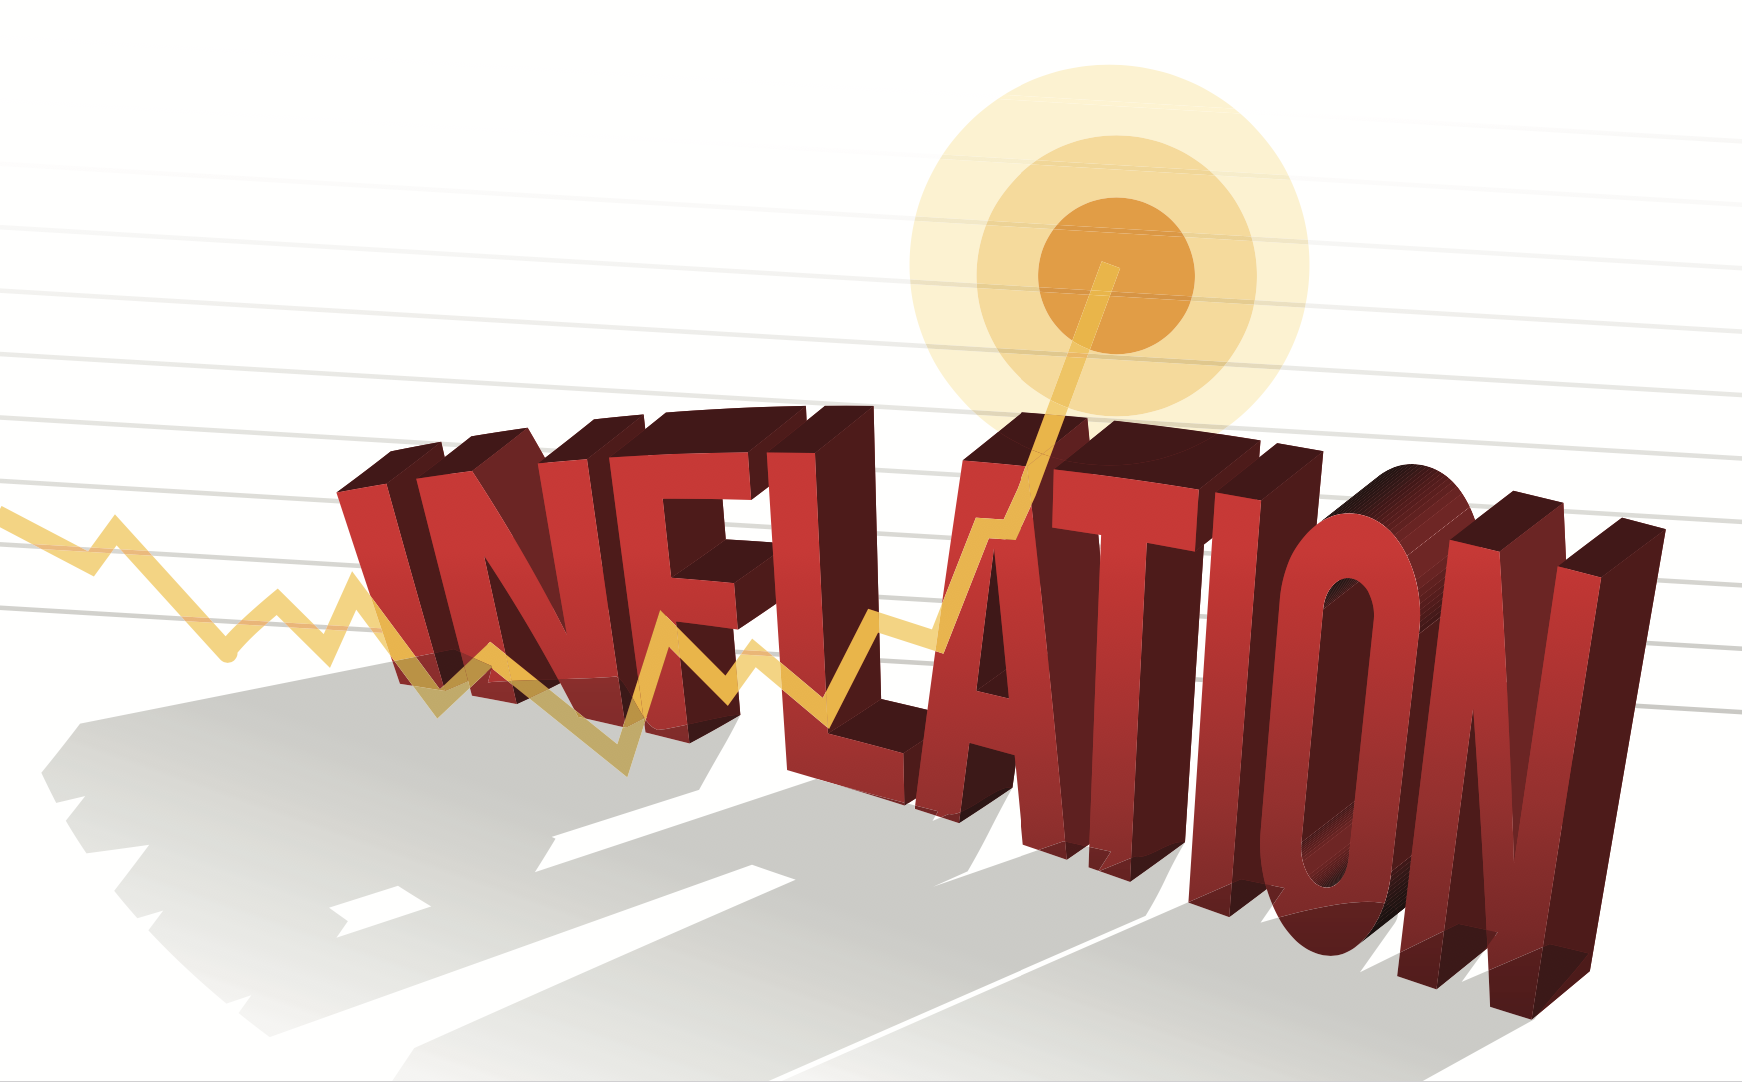 graphic image displaying rising inflation vector